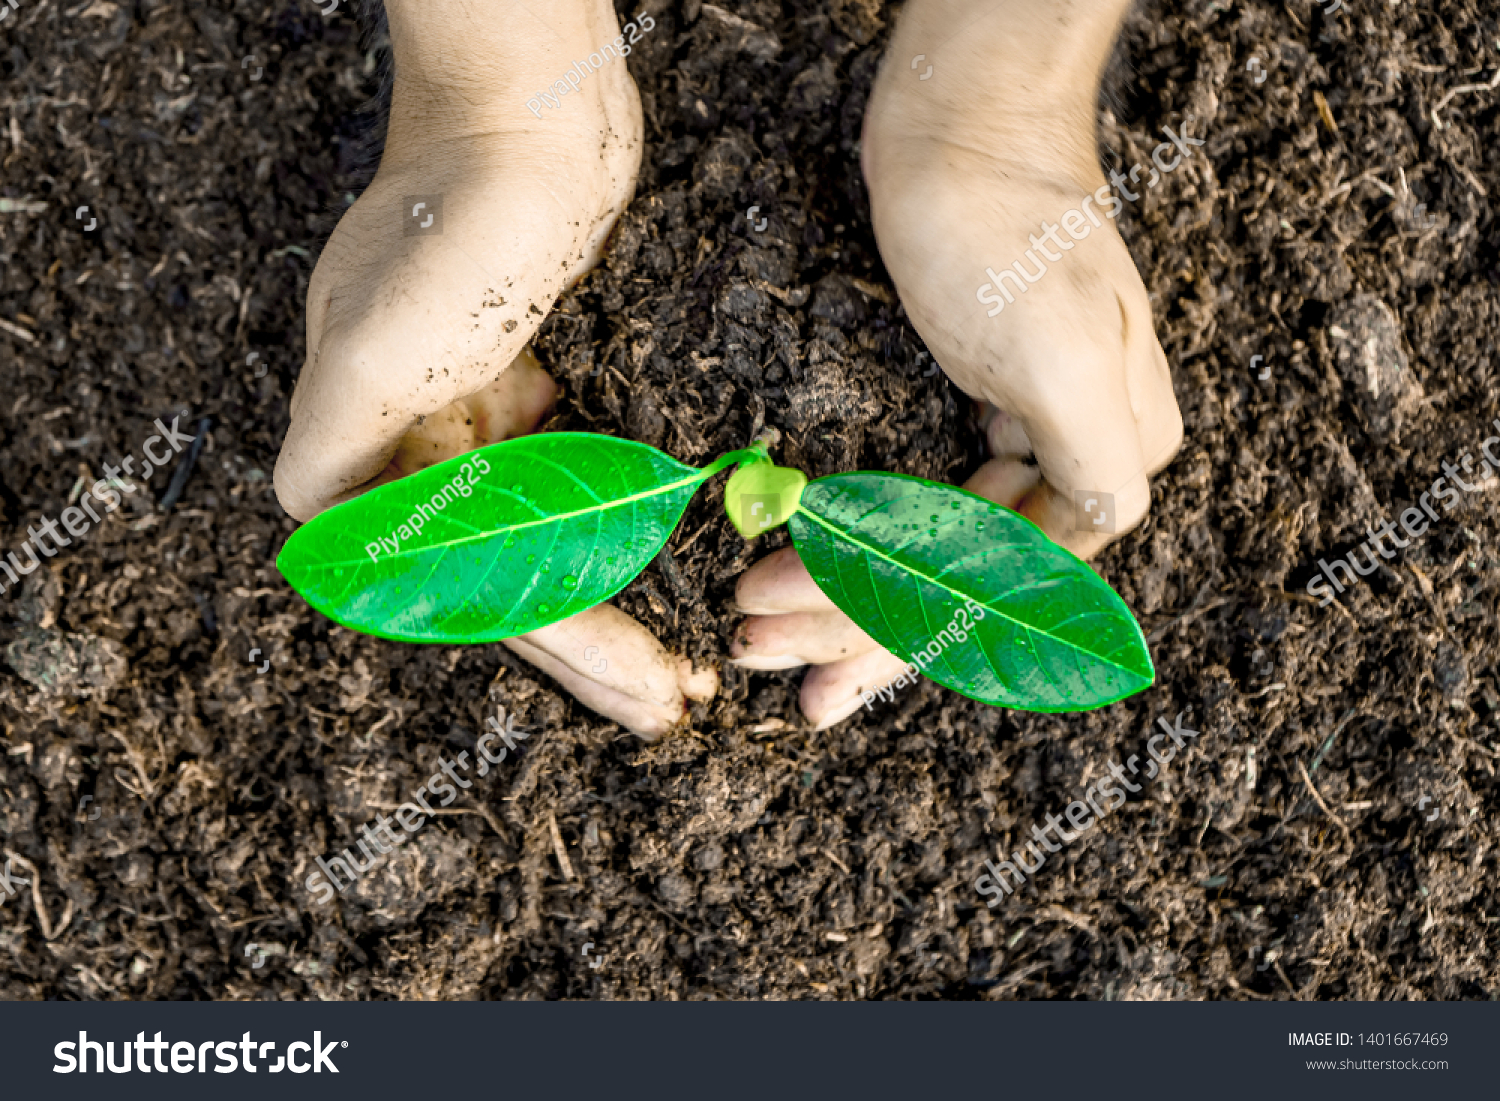 Close-up photos of planting tree seedlings, natural conservation concepts to reduce global warming. #1401667469